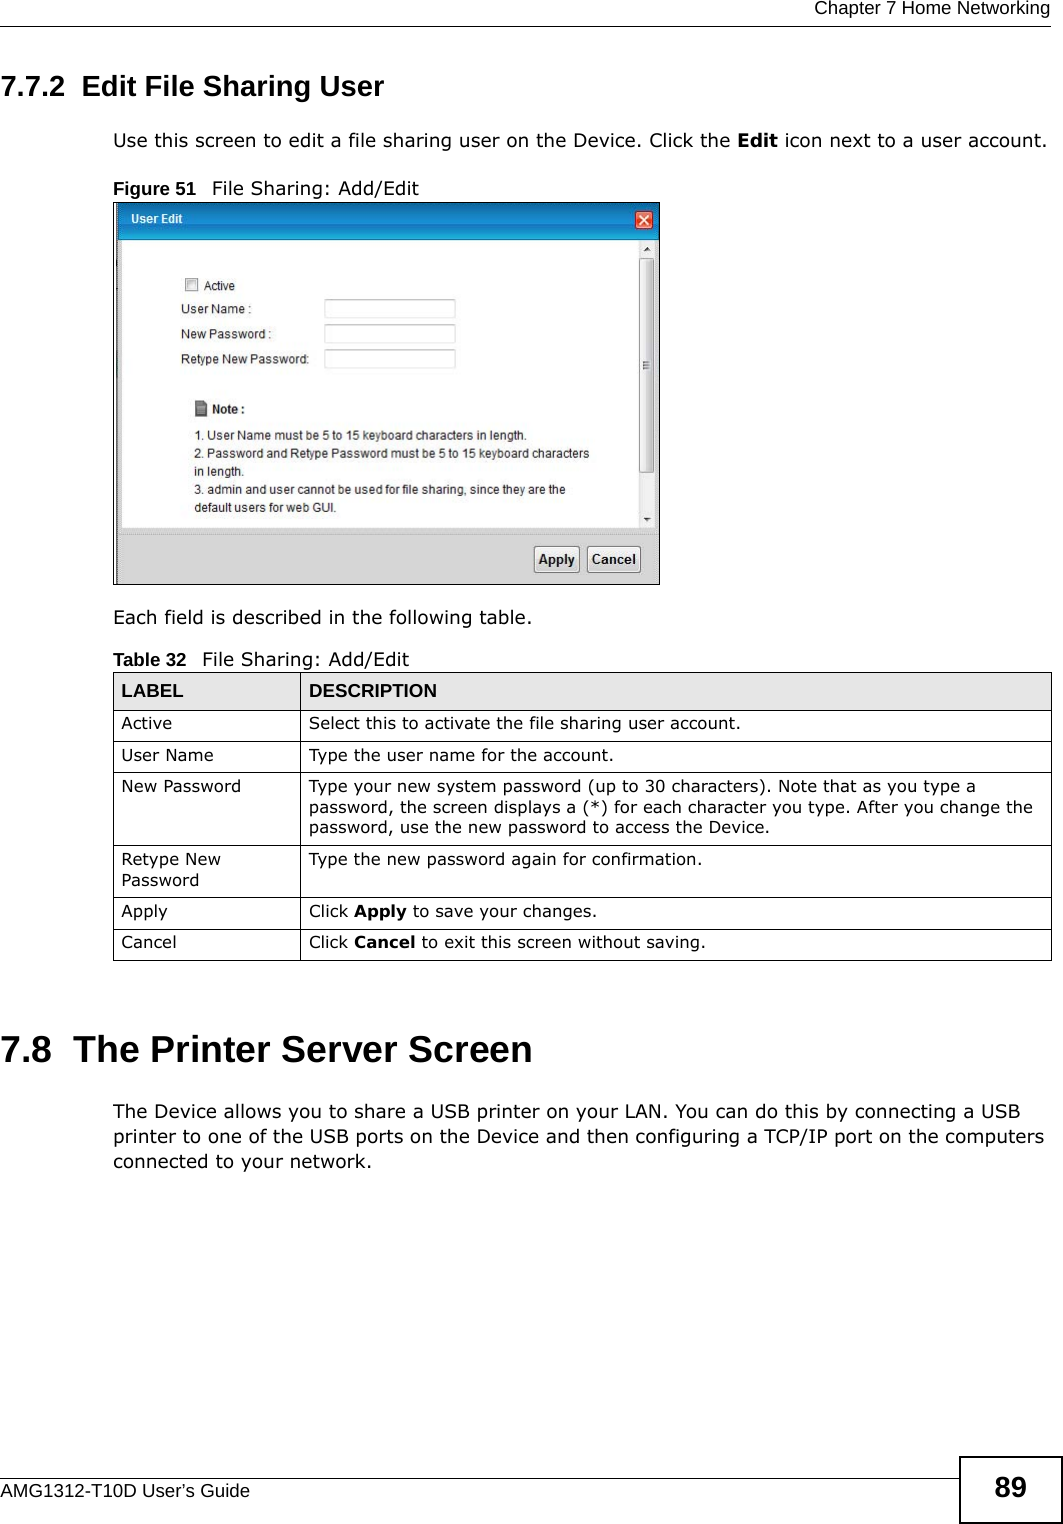  Chapter 7 Home NetworkingAMG1312-T10D User’s Guide 897.7.2  Edit File Sharing UserUse this screen to edit a file sharing user on the Device. Click the Edit icon next to a user account.Figure 51   File Sharing: Add/EditEach field is described in the following table.7.8  The Printer Server ScreenThe Device allows you to share a USB printer on your LAN. You can do this by connecting a USB printer to one of the USB ports on the Device and then configuring a TCP/IP port on the computers connected to your network. Table 32   File Sharing: Add/EditLABEL DESCRIPTIONActive Select this to activate the file sharing user account.User Name Type the user name for the account.New Password Type your new system password (up to 30 characters). Note that as you type a password, the screen displays a (*) for each character you type. After you change the password, use the new password to access the Device.Retype New PasswordType the new password again for confirmation.Apply Click Apply to save your changes.Cancel Click Cancel to exit this screen without saving.